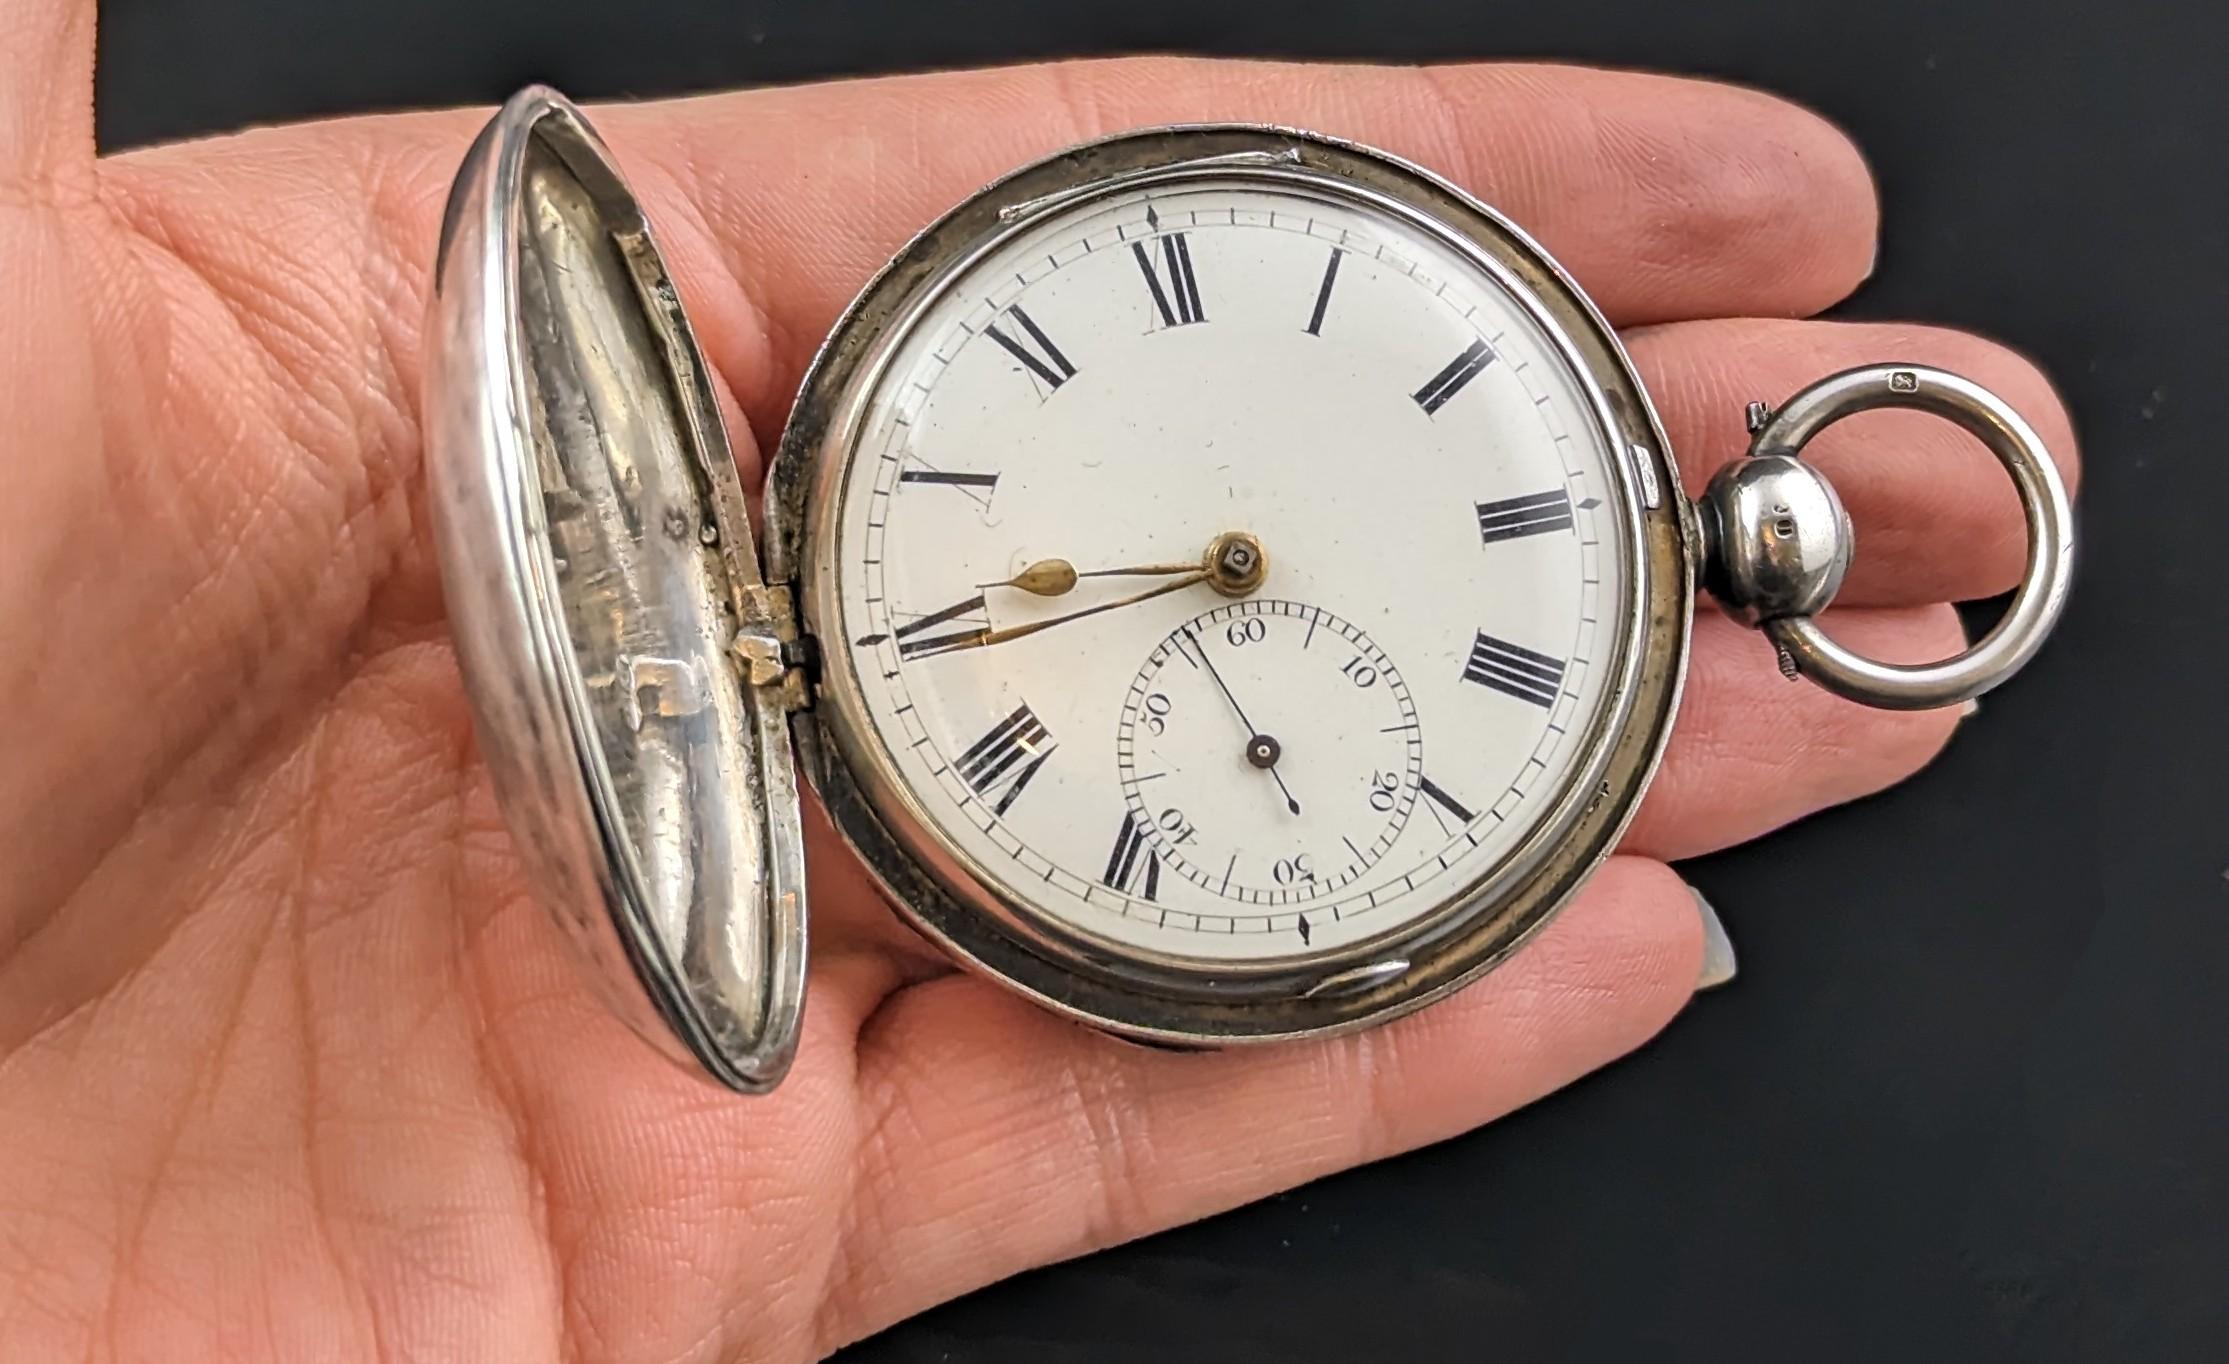 A magnificent Regency era sterling silver full hunter pocket watch.

It is large substantial pocket watch with a heavy silver full hunter case, fully hallmarked.

It has a white dial with black Roman numerals and gilt hands with a subsidiary second